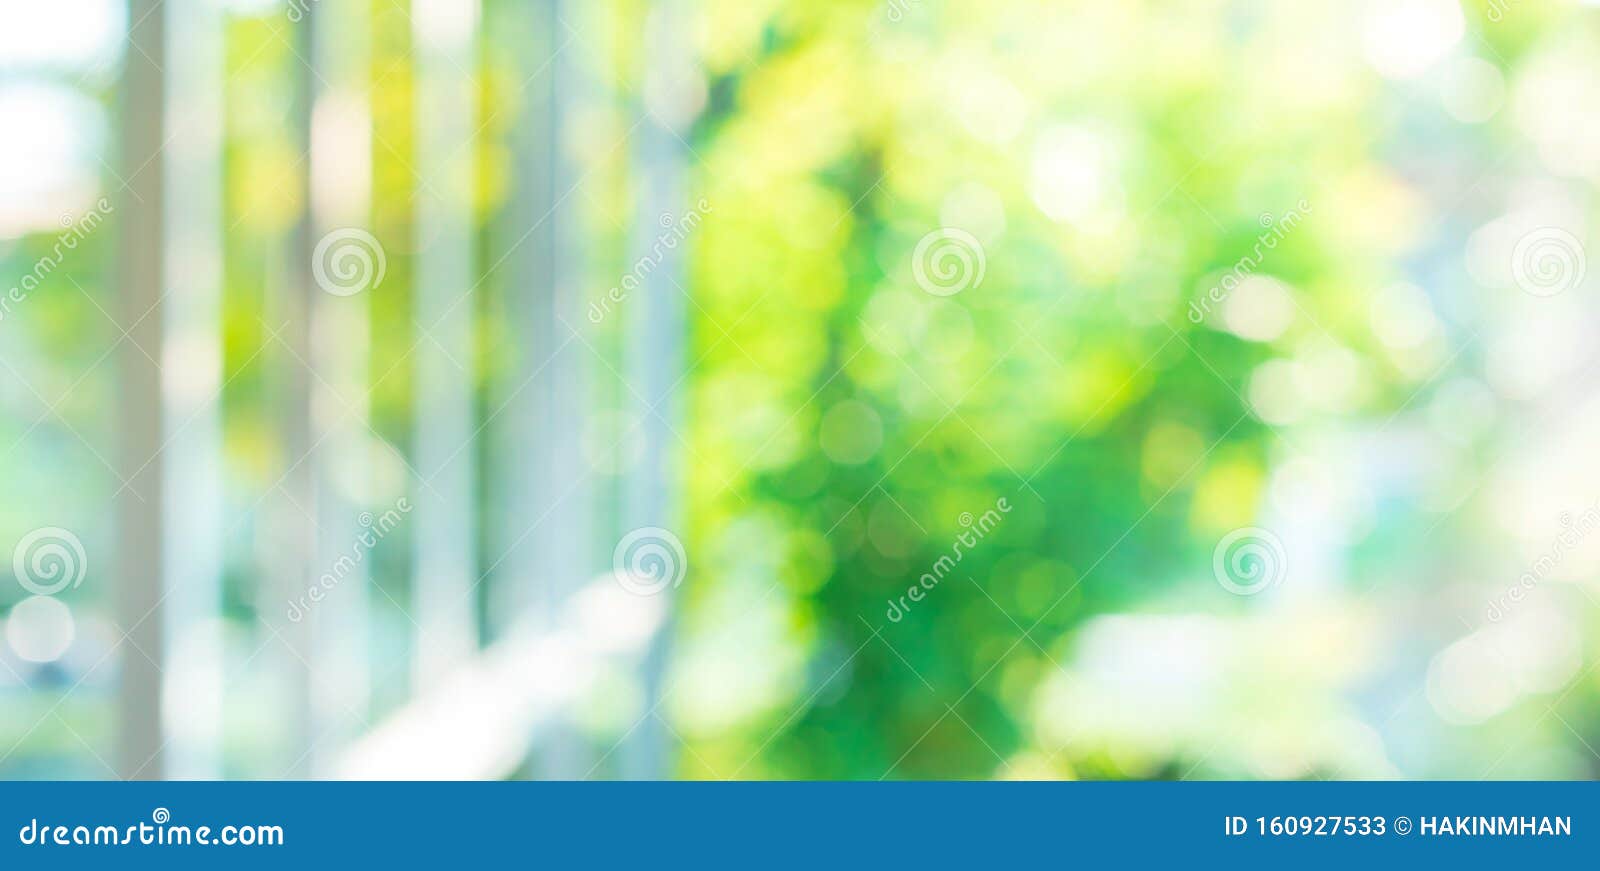 Blur Green Nature Garden Background Stock Image - Image of blurry,  colorful: 160927533